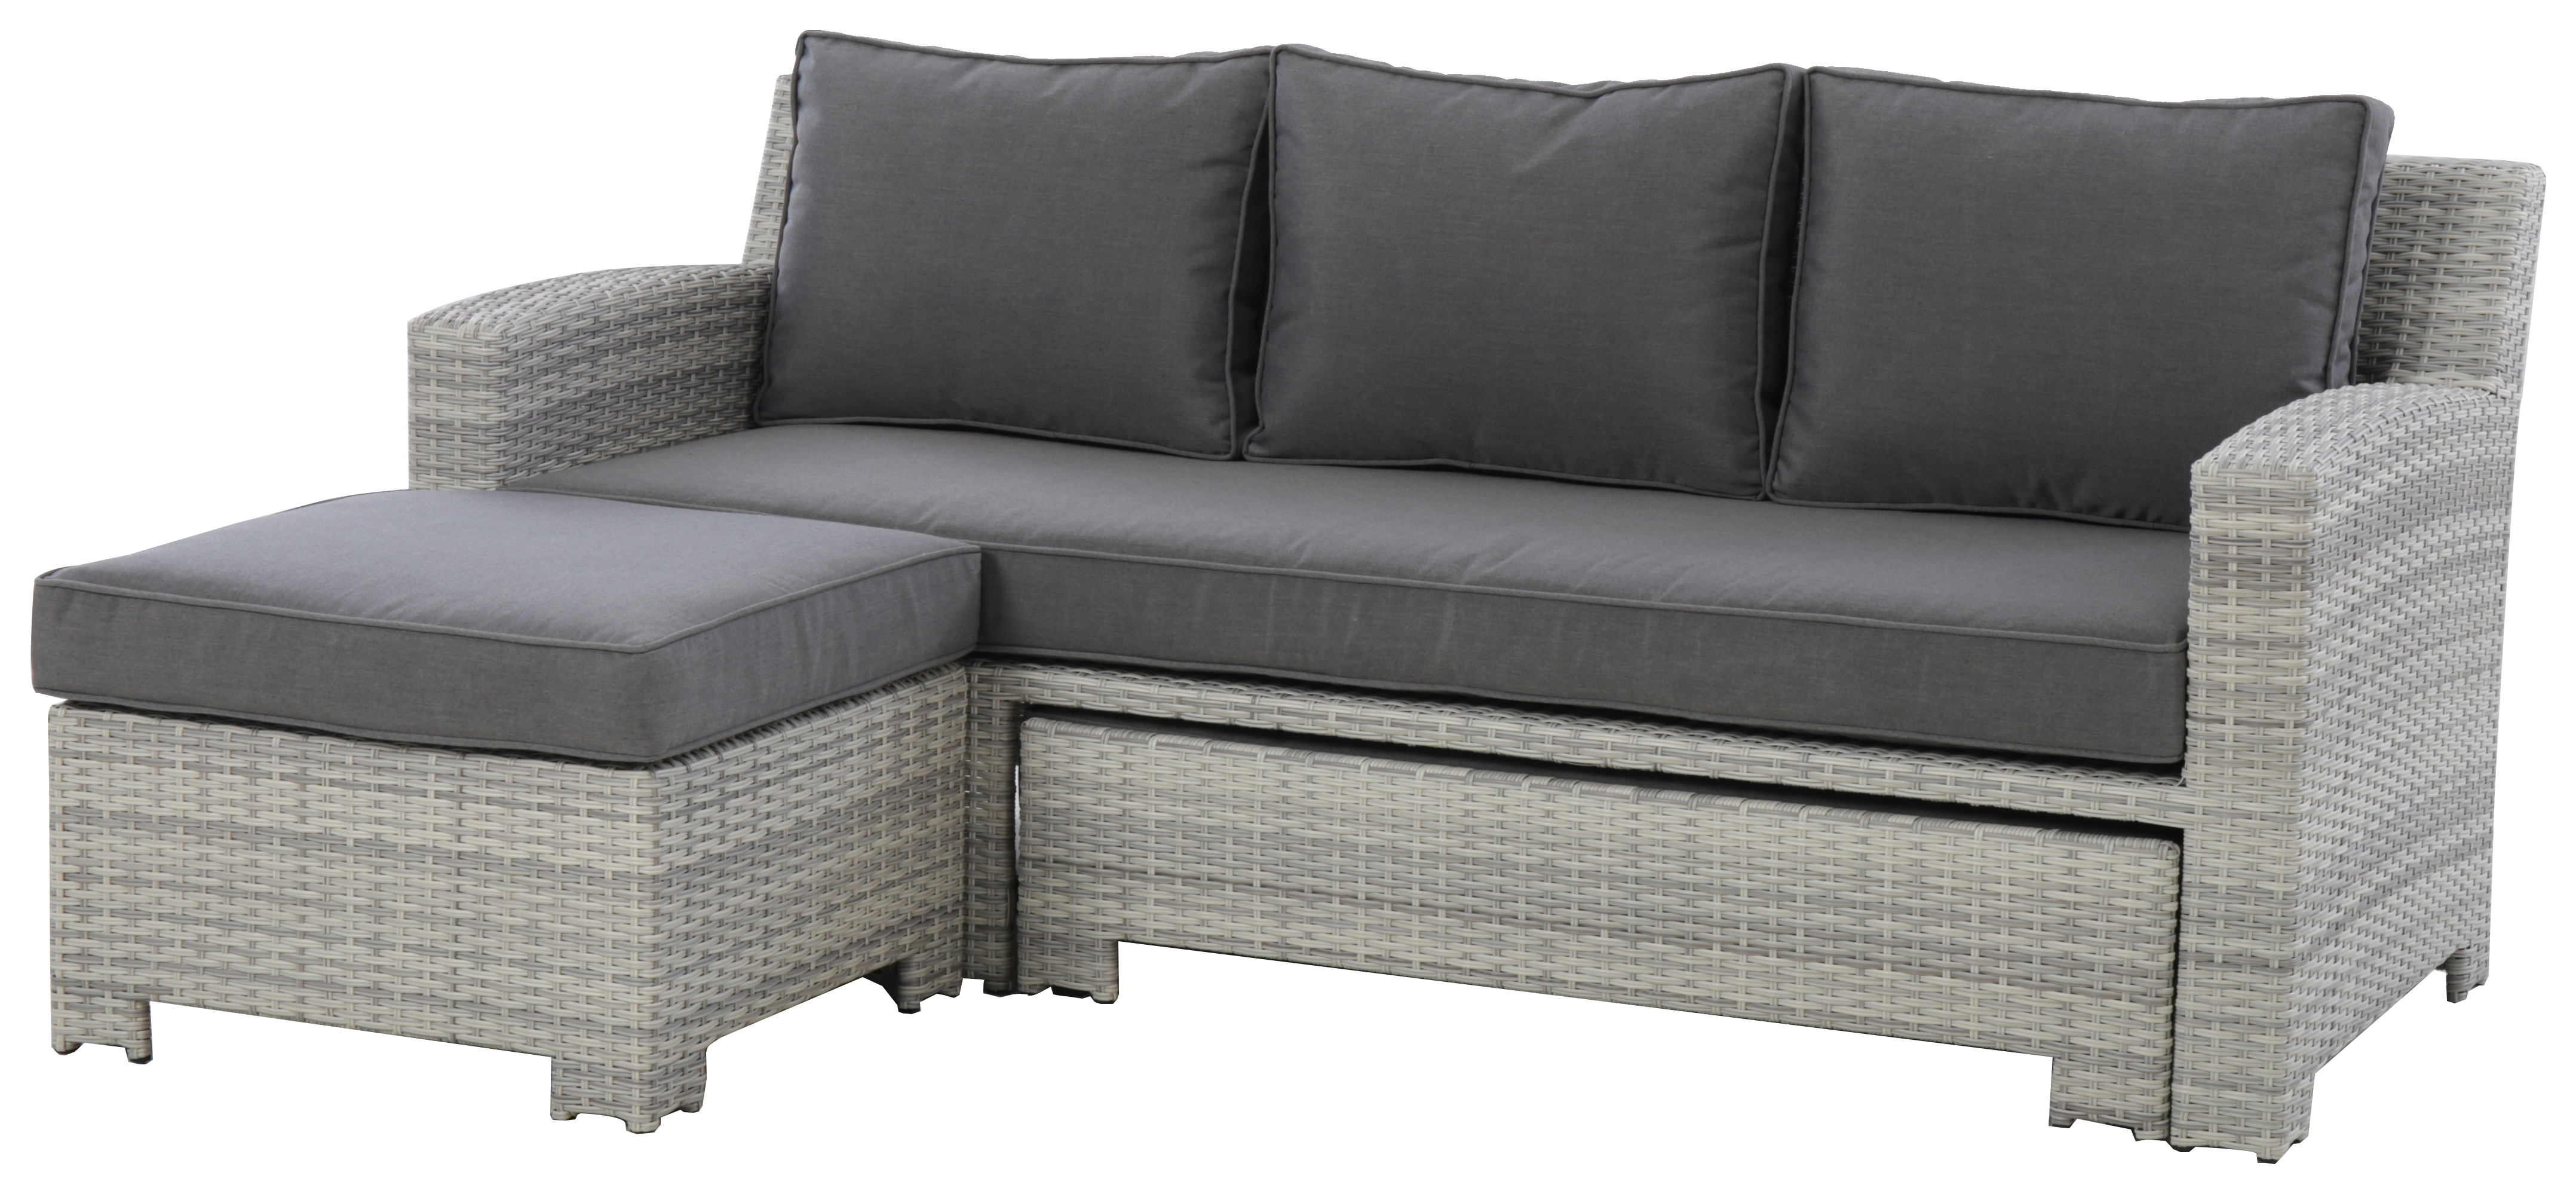 Image of Norfolk Leisure Oxborough Pull Out Lounge Rattan Sofa